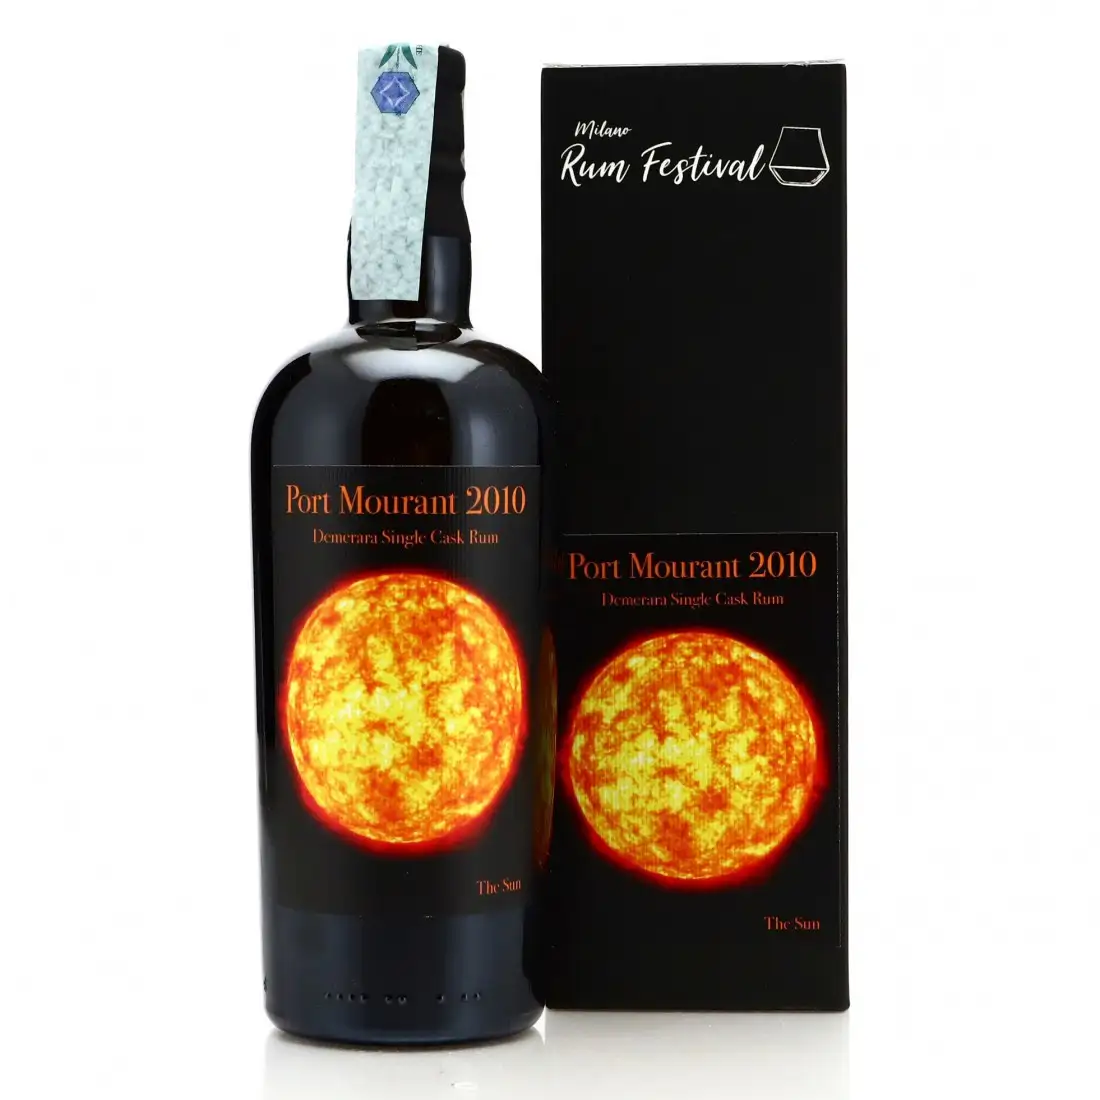 Image of the front of the bottle of the rum Demerara Single Cask Rum